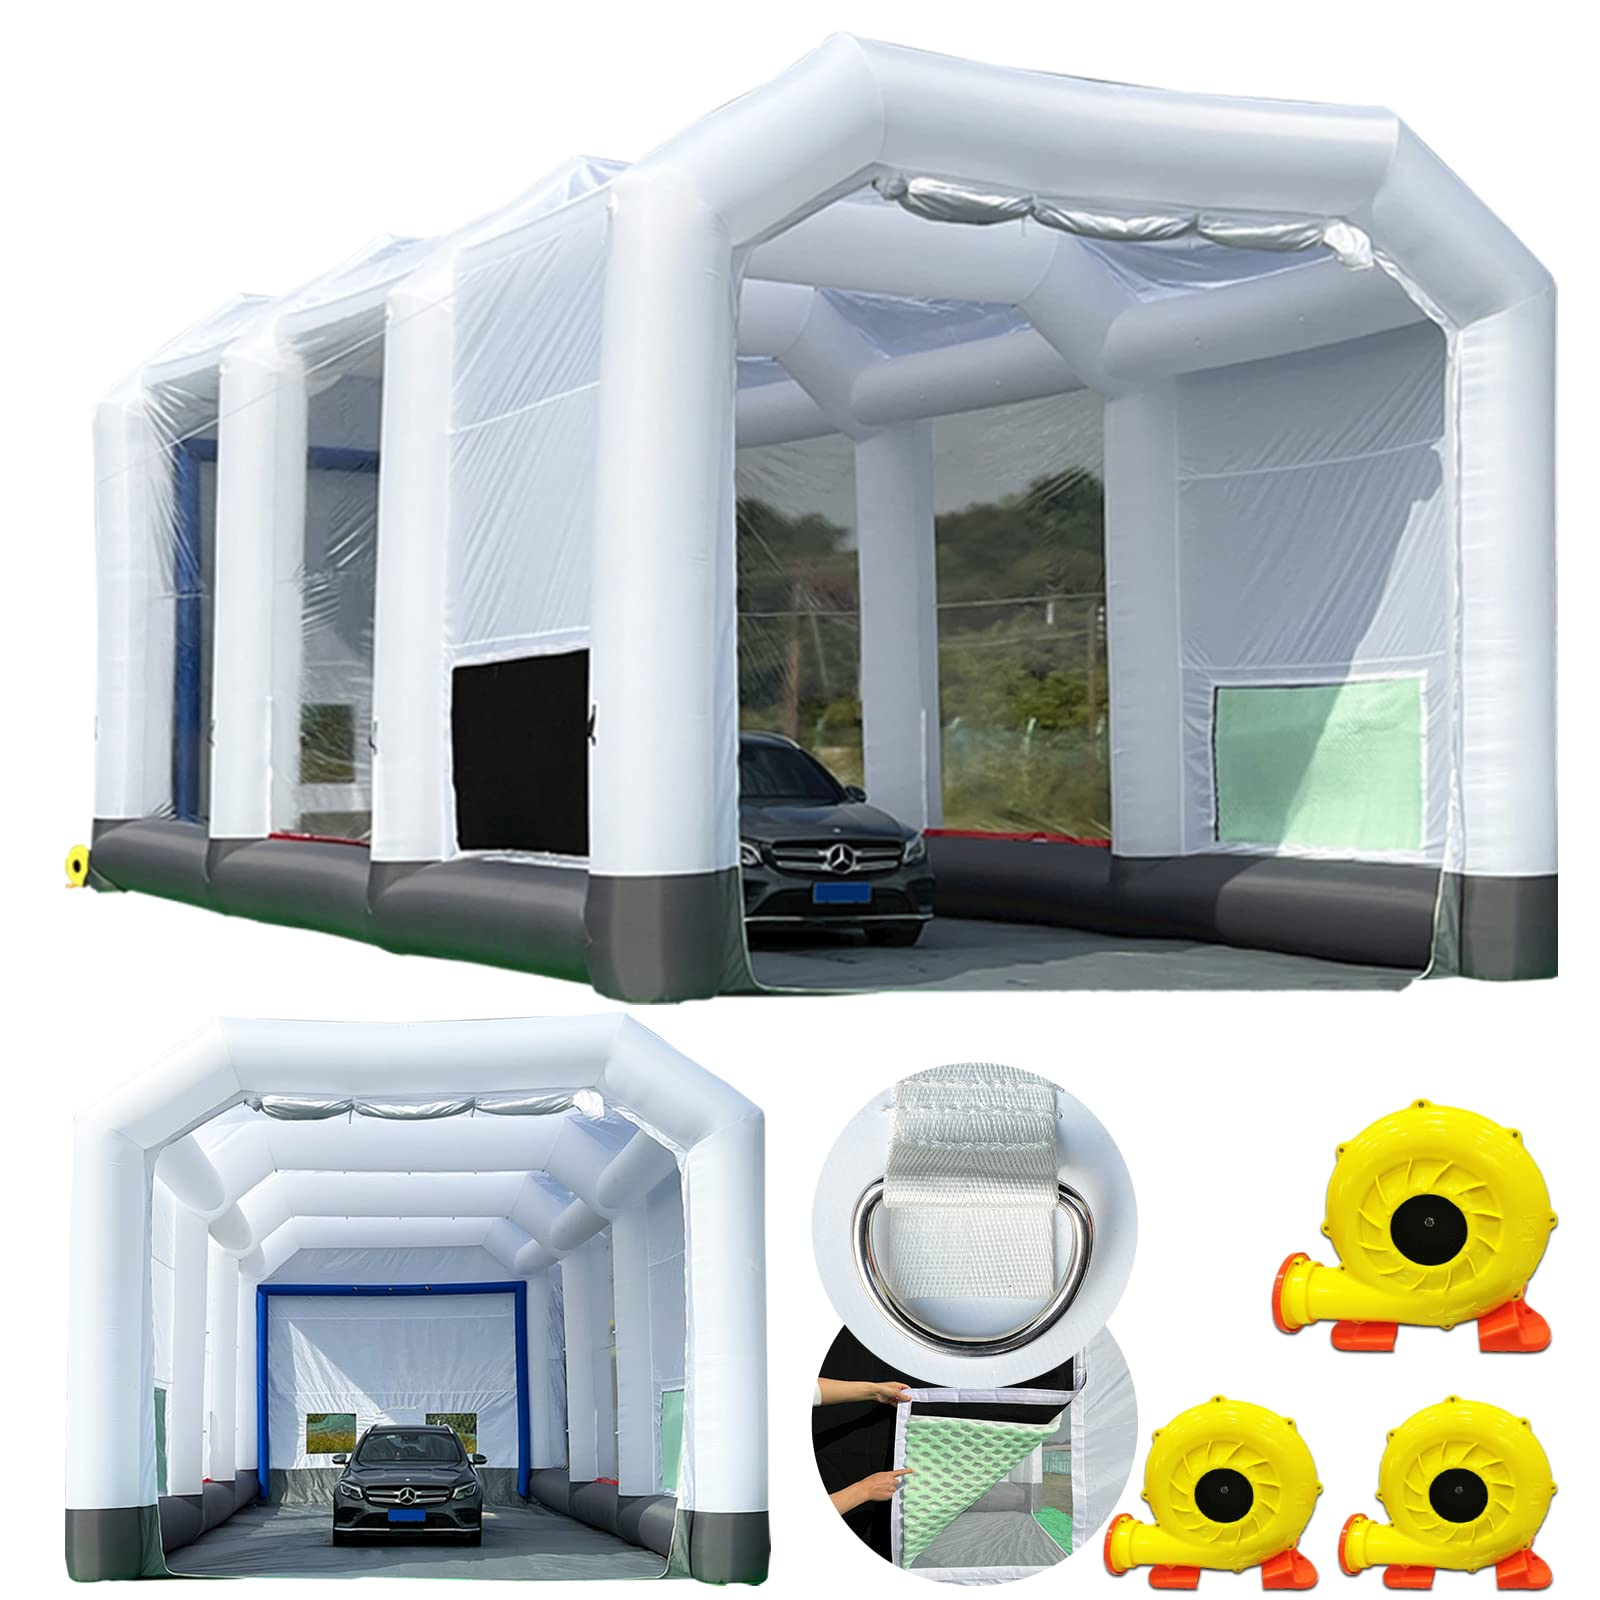 GORILLASPRO Inflatable Spray Paint Booth 40X20X13Ft with 3 Blowers  (1100W+750W+750W), Large Mobile Portable Truck Paint Booth for Big Items  Painting